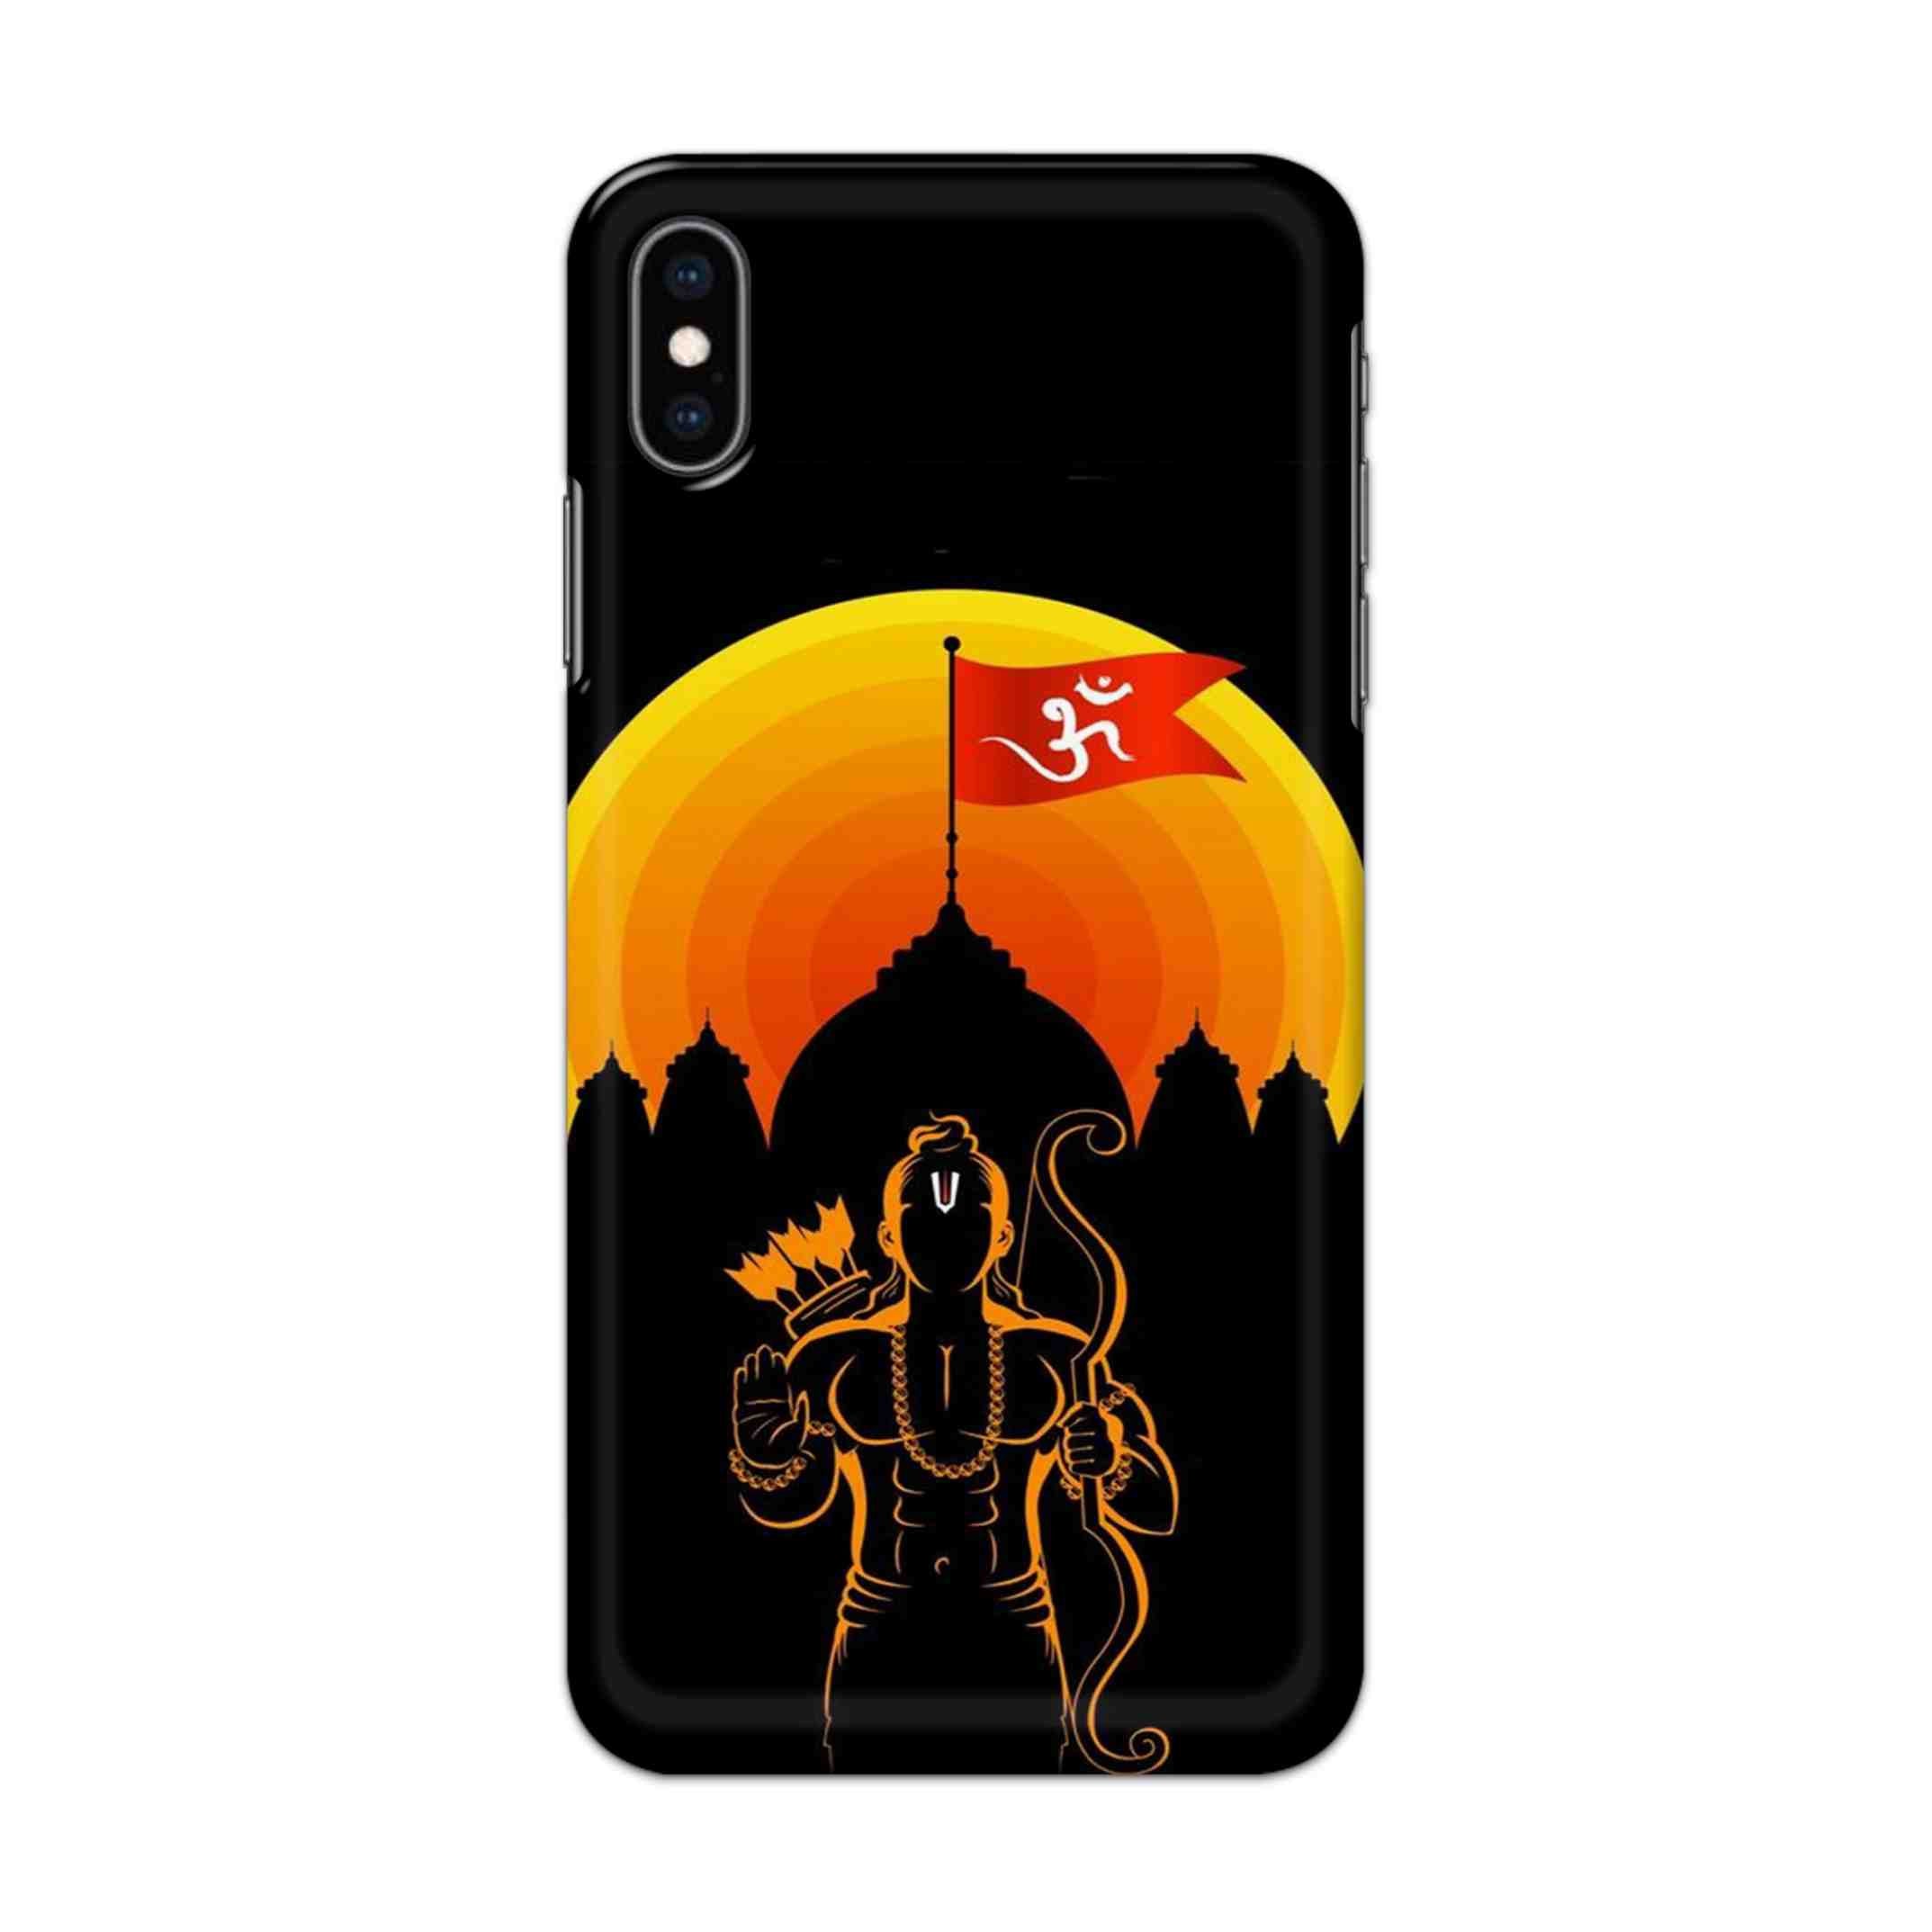 Buy Ram Ji Hard Back Mobile Phone Case/Cover For iPhone XS MAX Online